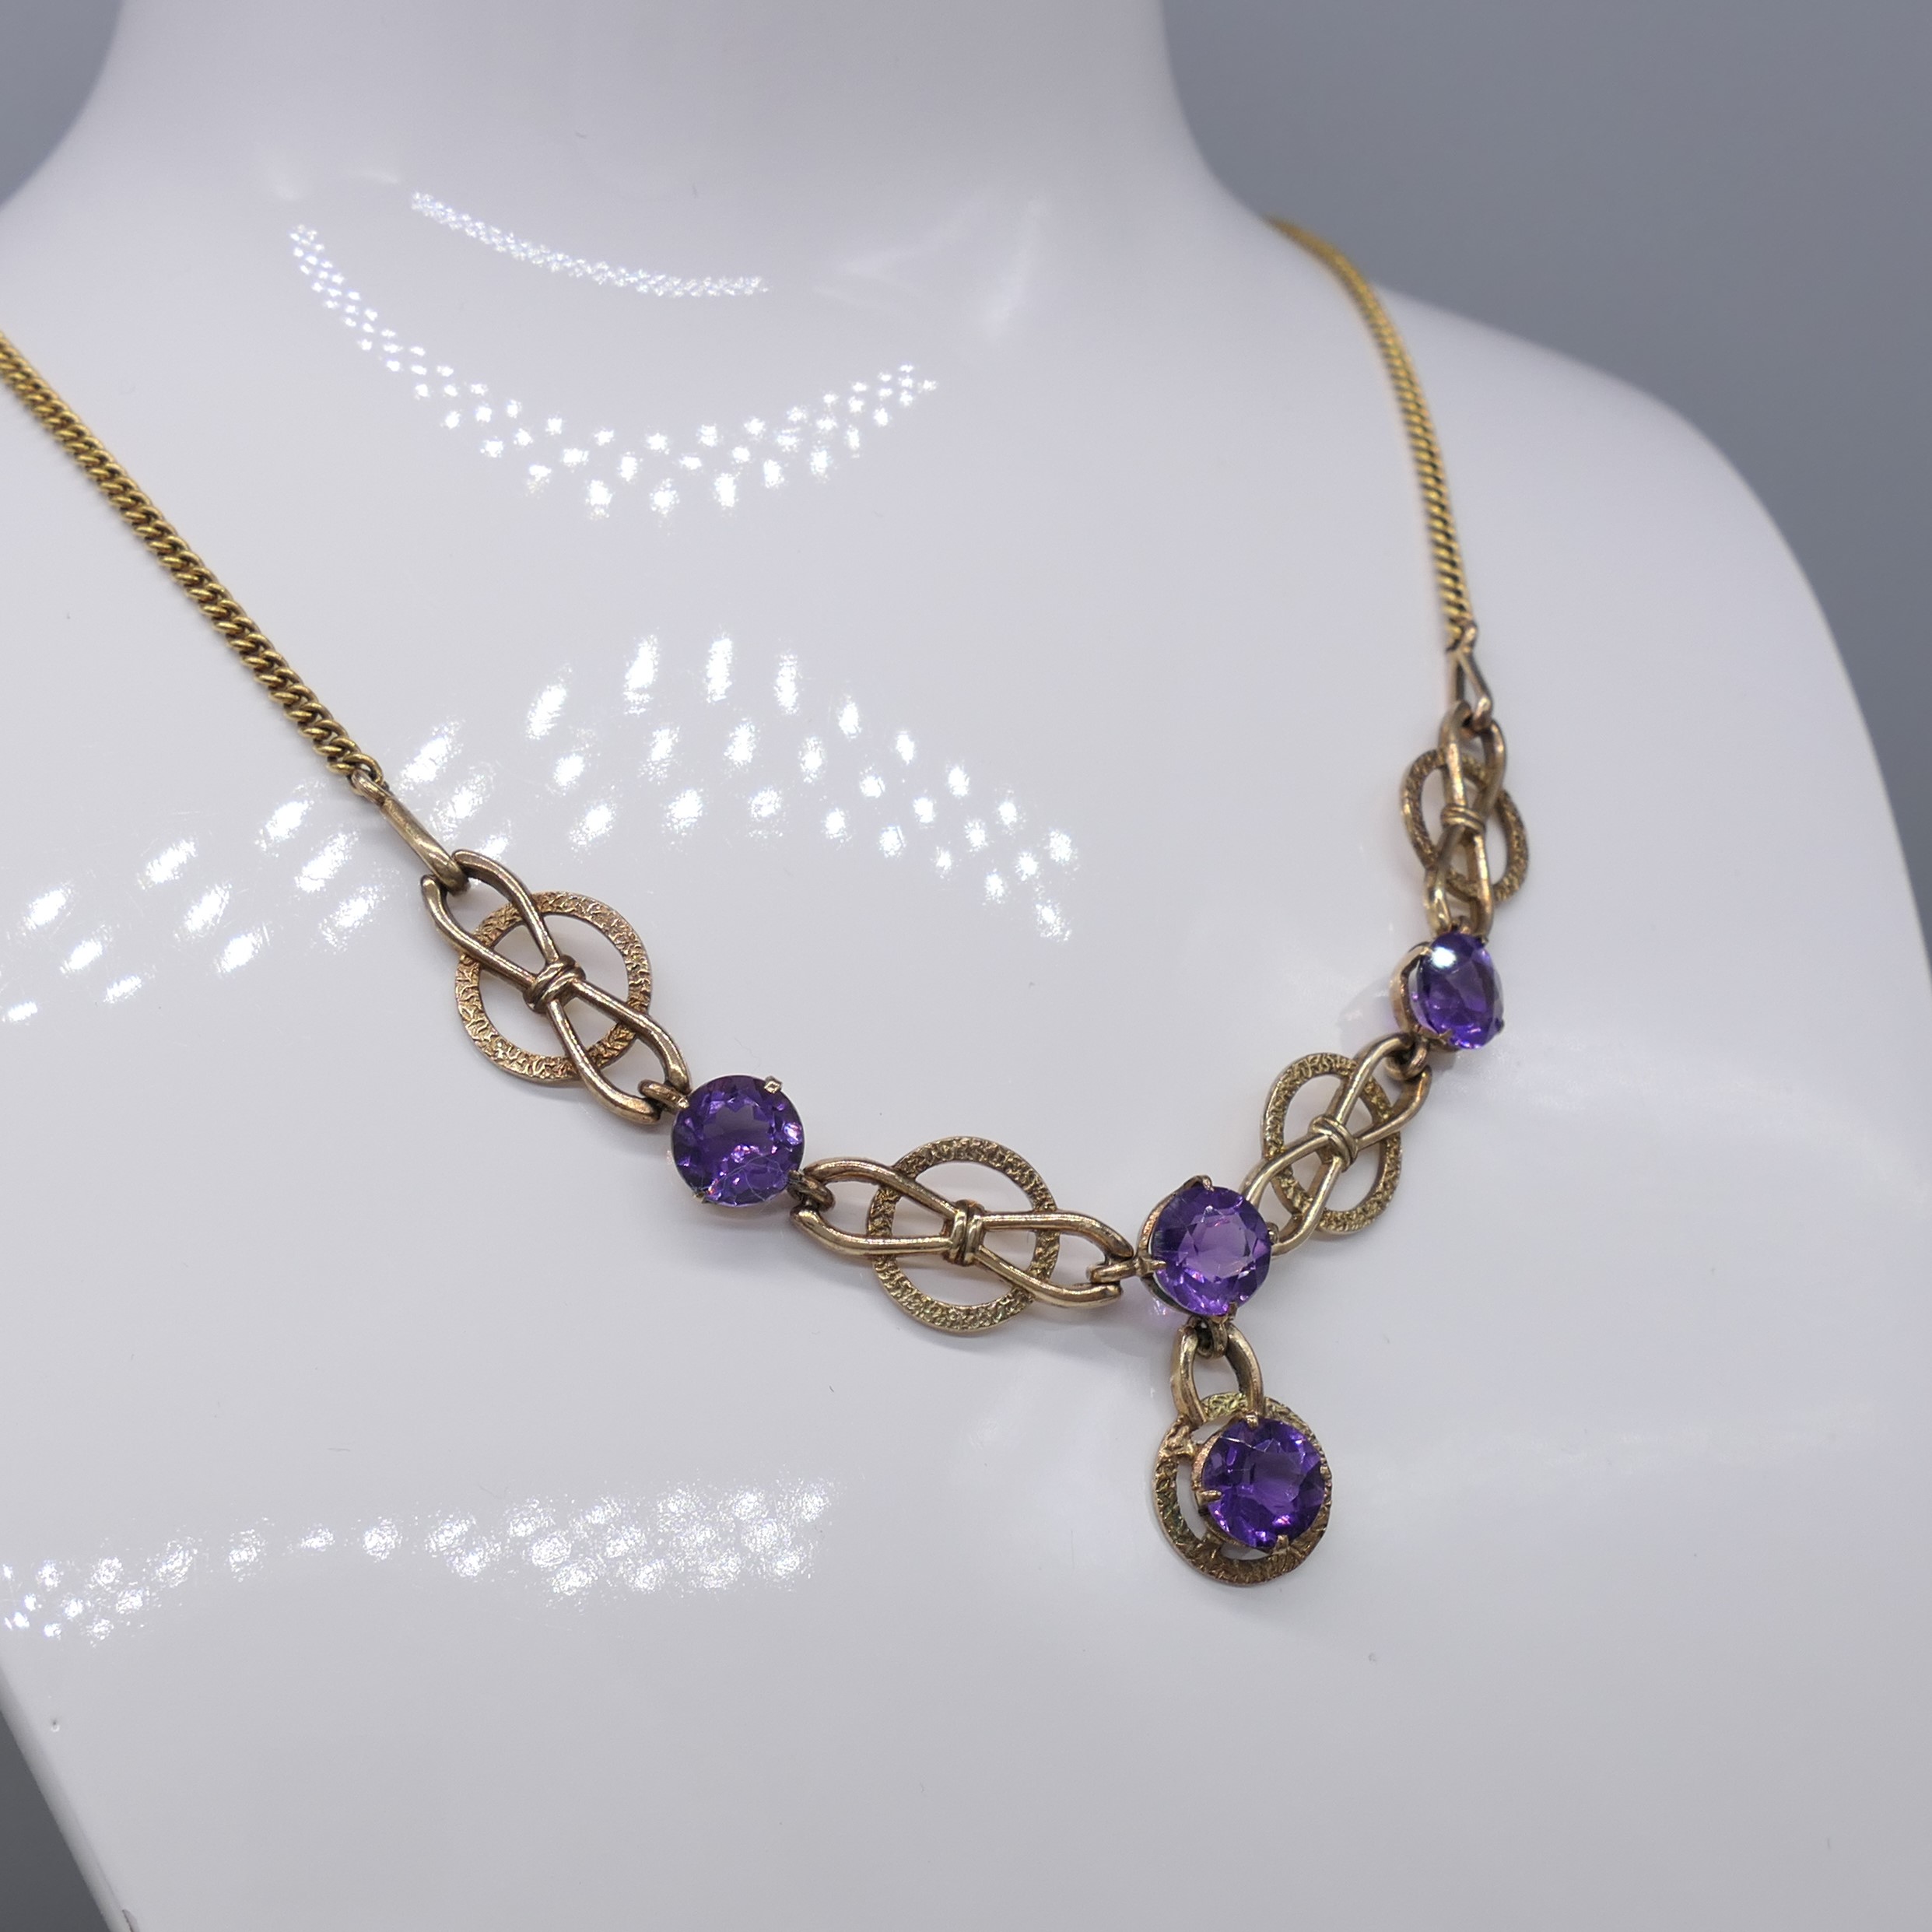 Ornate vintage 9ct yellow gold necklace set with round-cut purple amethysts - Image 7 of 9